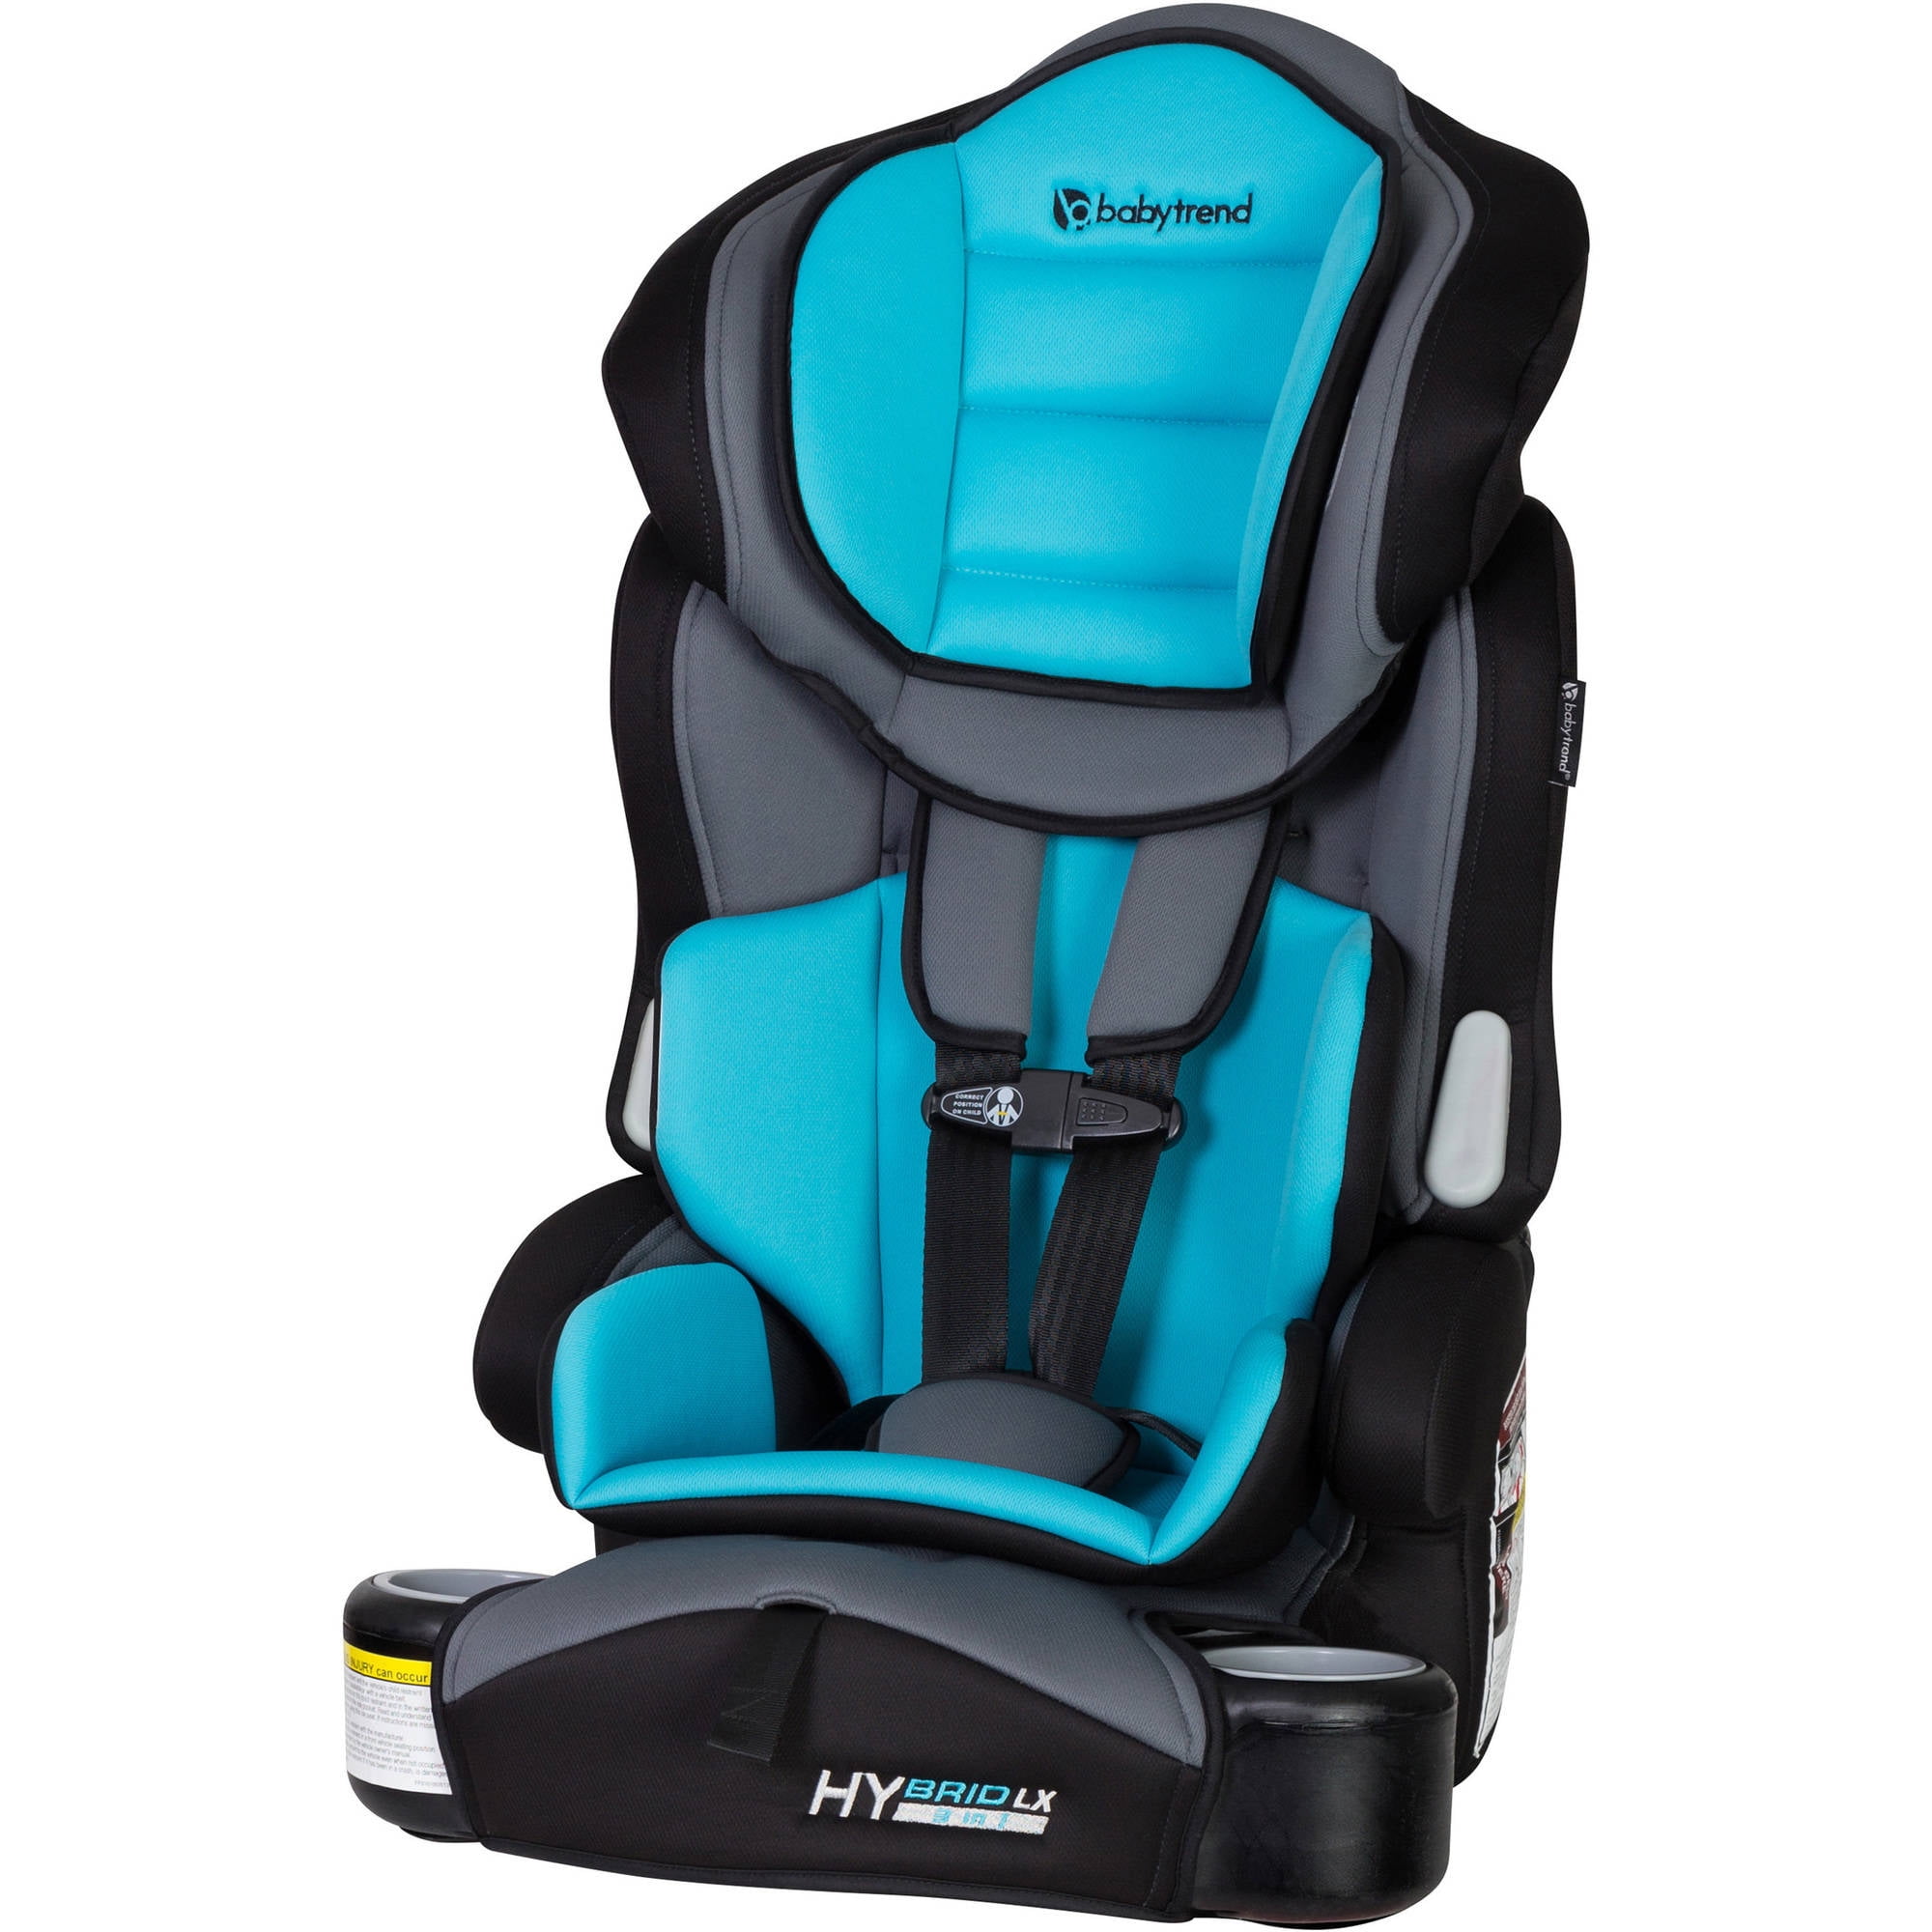 Baby Trend Hybrid 3-in-1 Harness Booster Car Seat, Blue Moon 